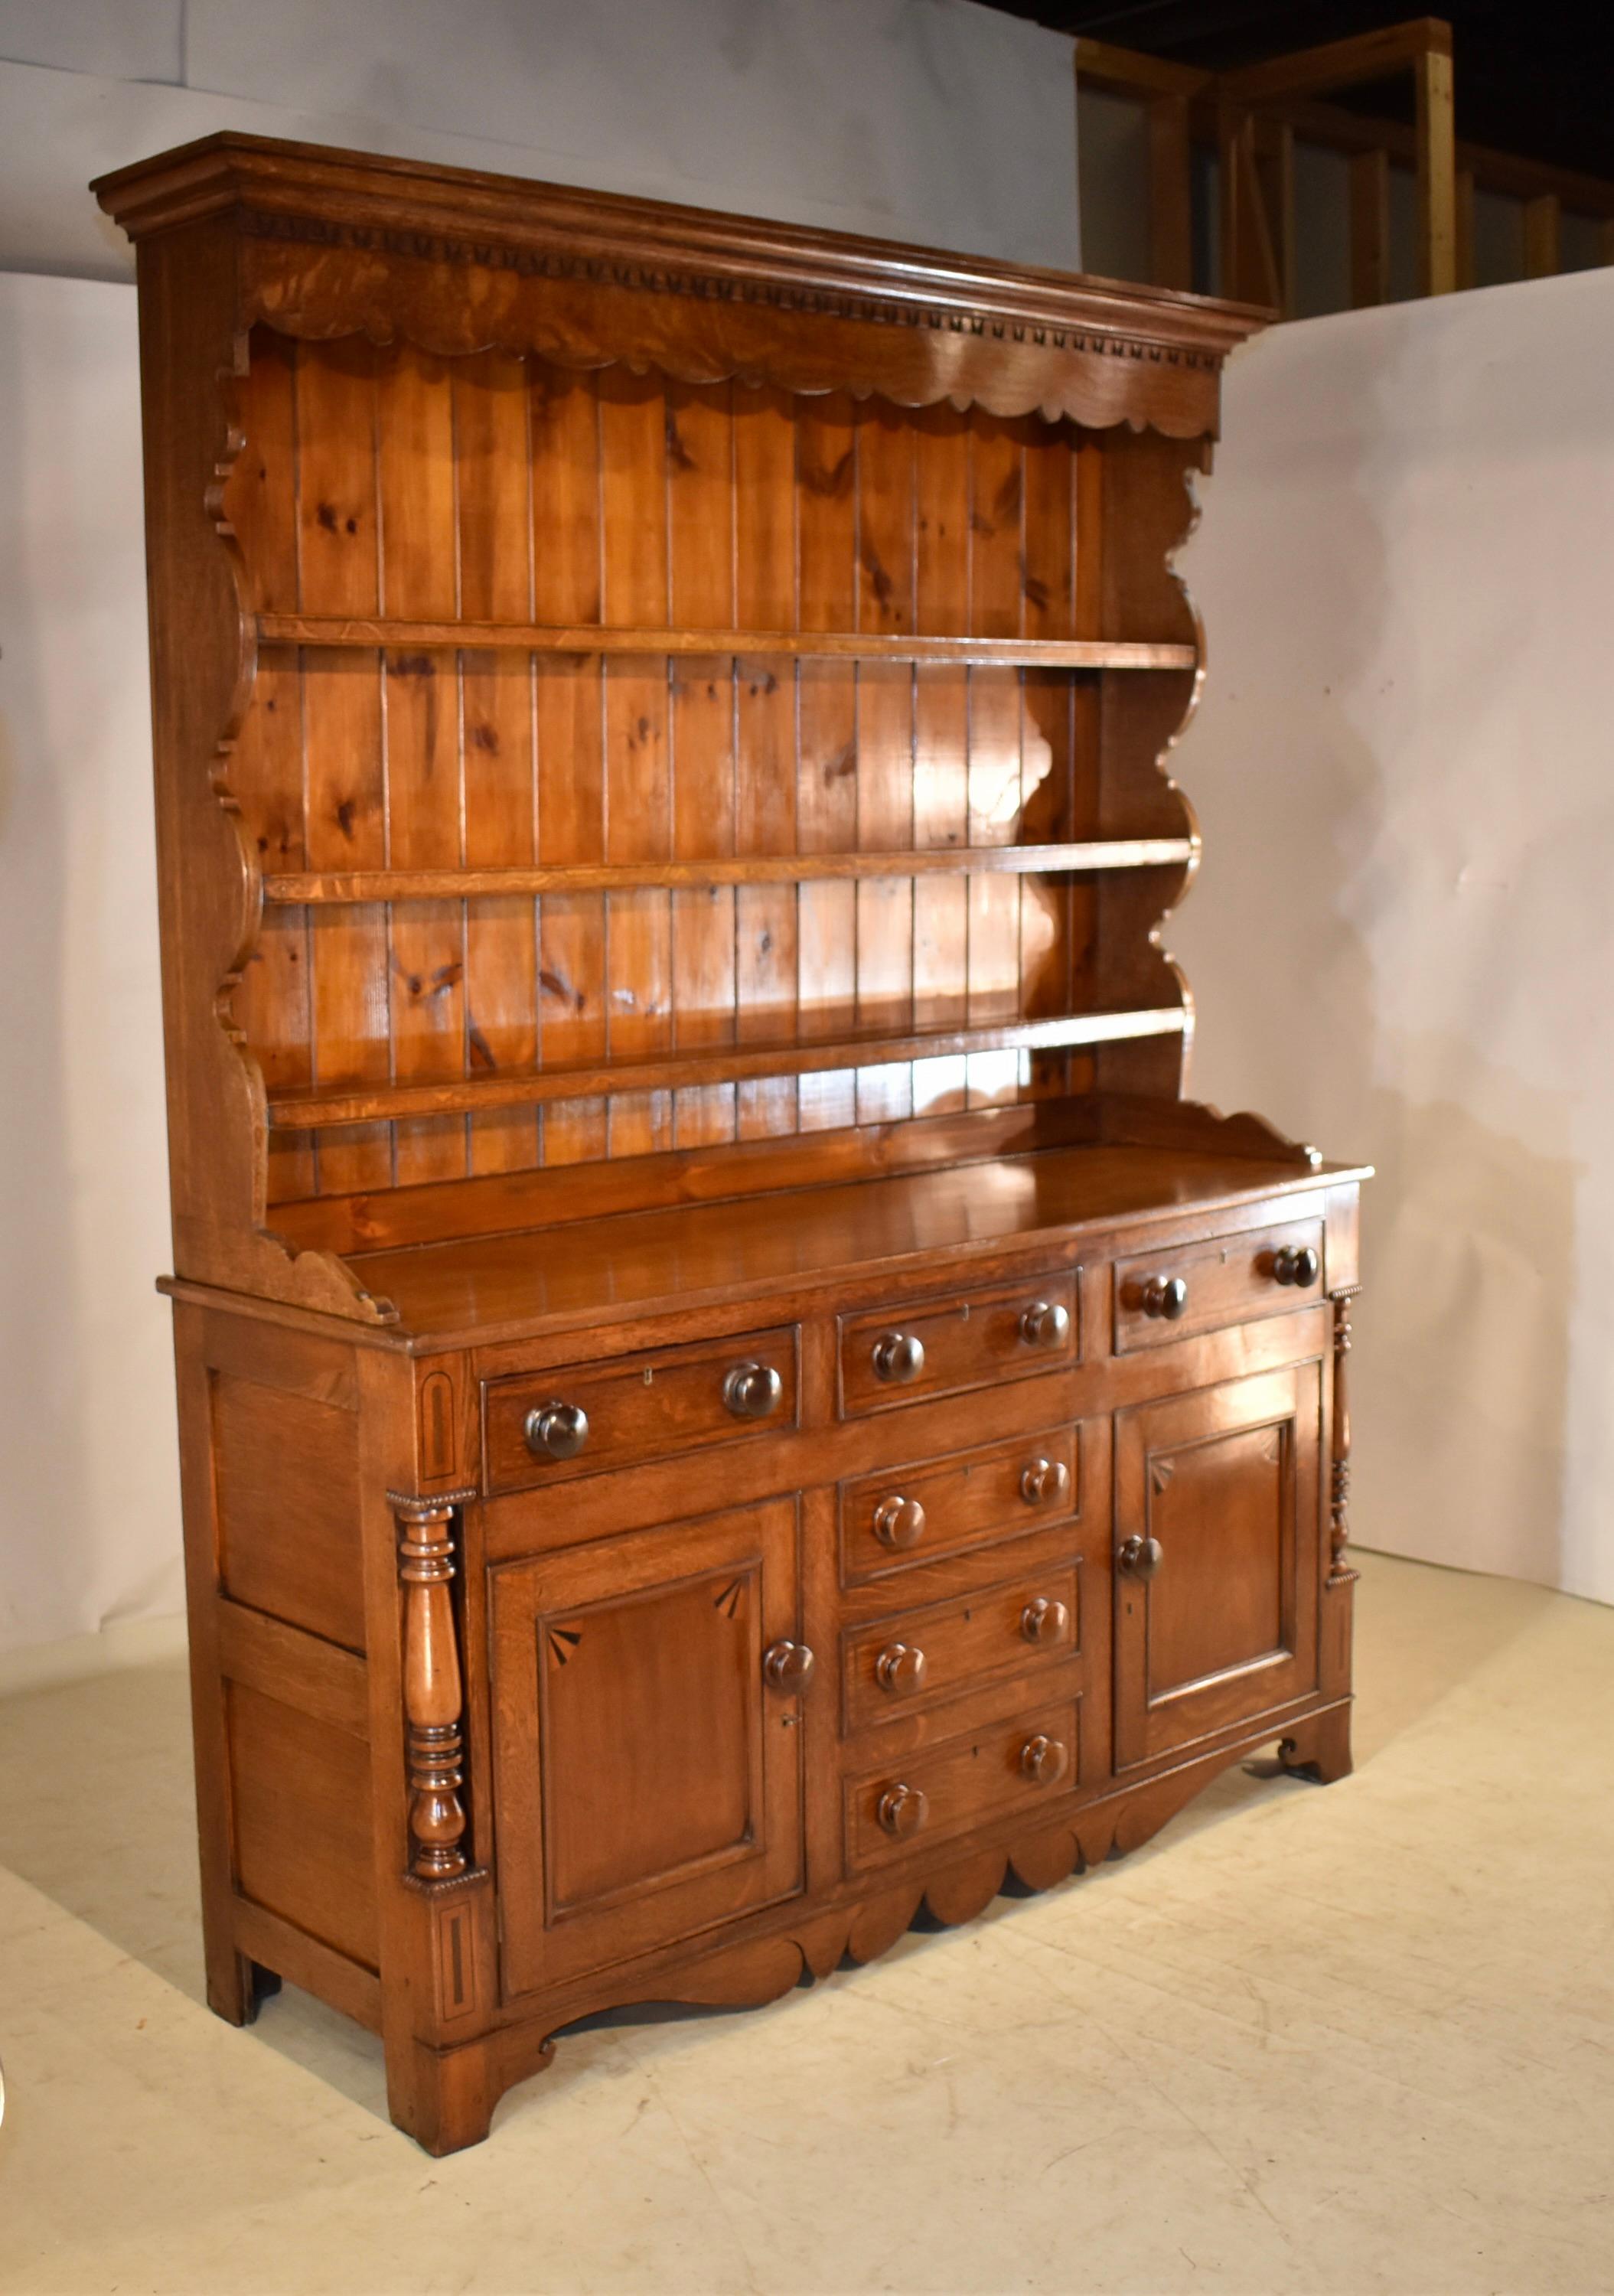 Early 19th Century Welsh Dresser In Good Condition For Sale In High Point, NC